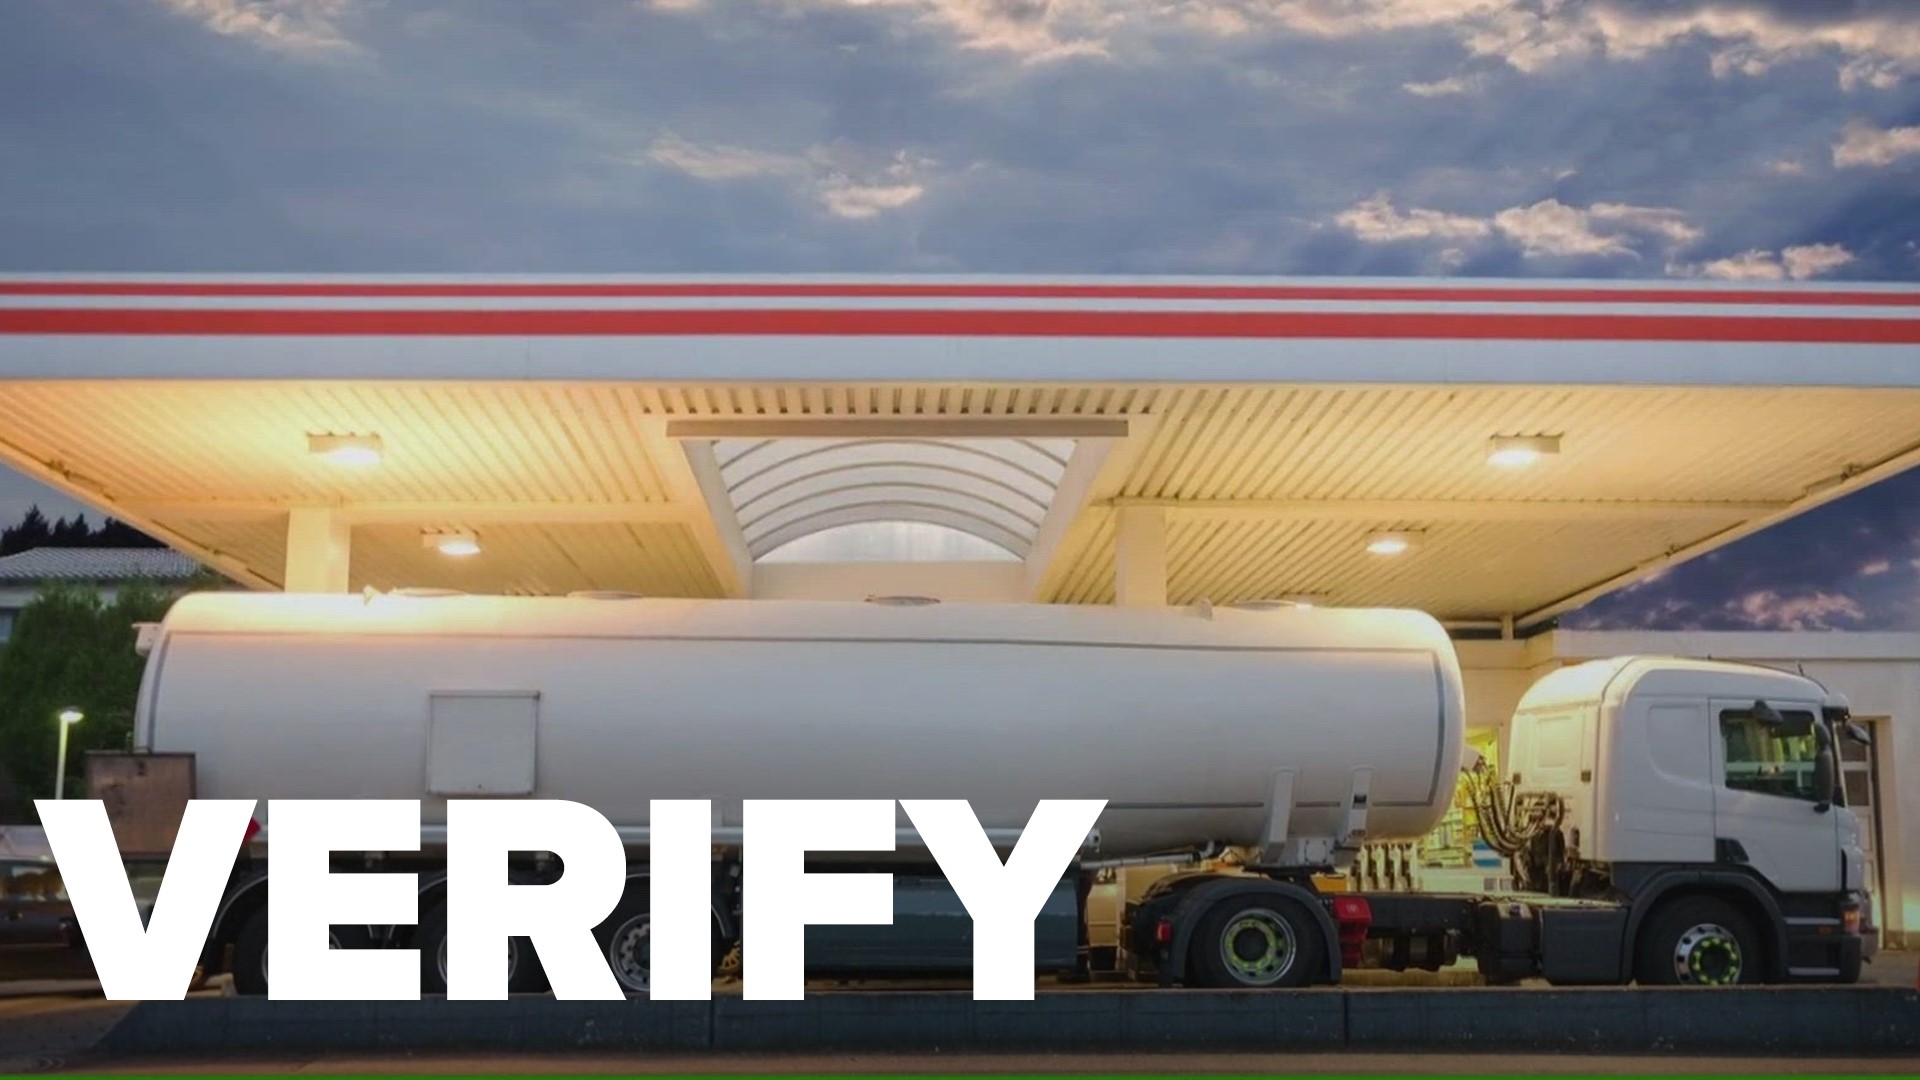 Sediment from the bottom of tanker trucks refueling at gas stations can sometimes get into your tank, potentially damaging your car. Here's what we can verify.